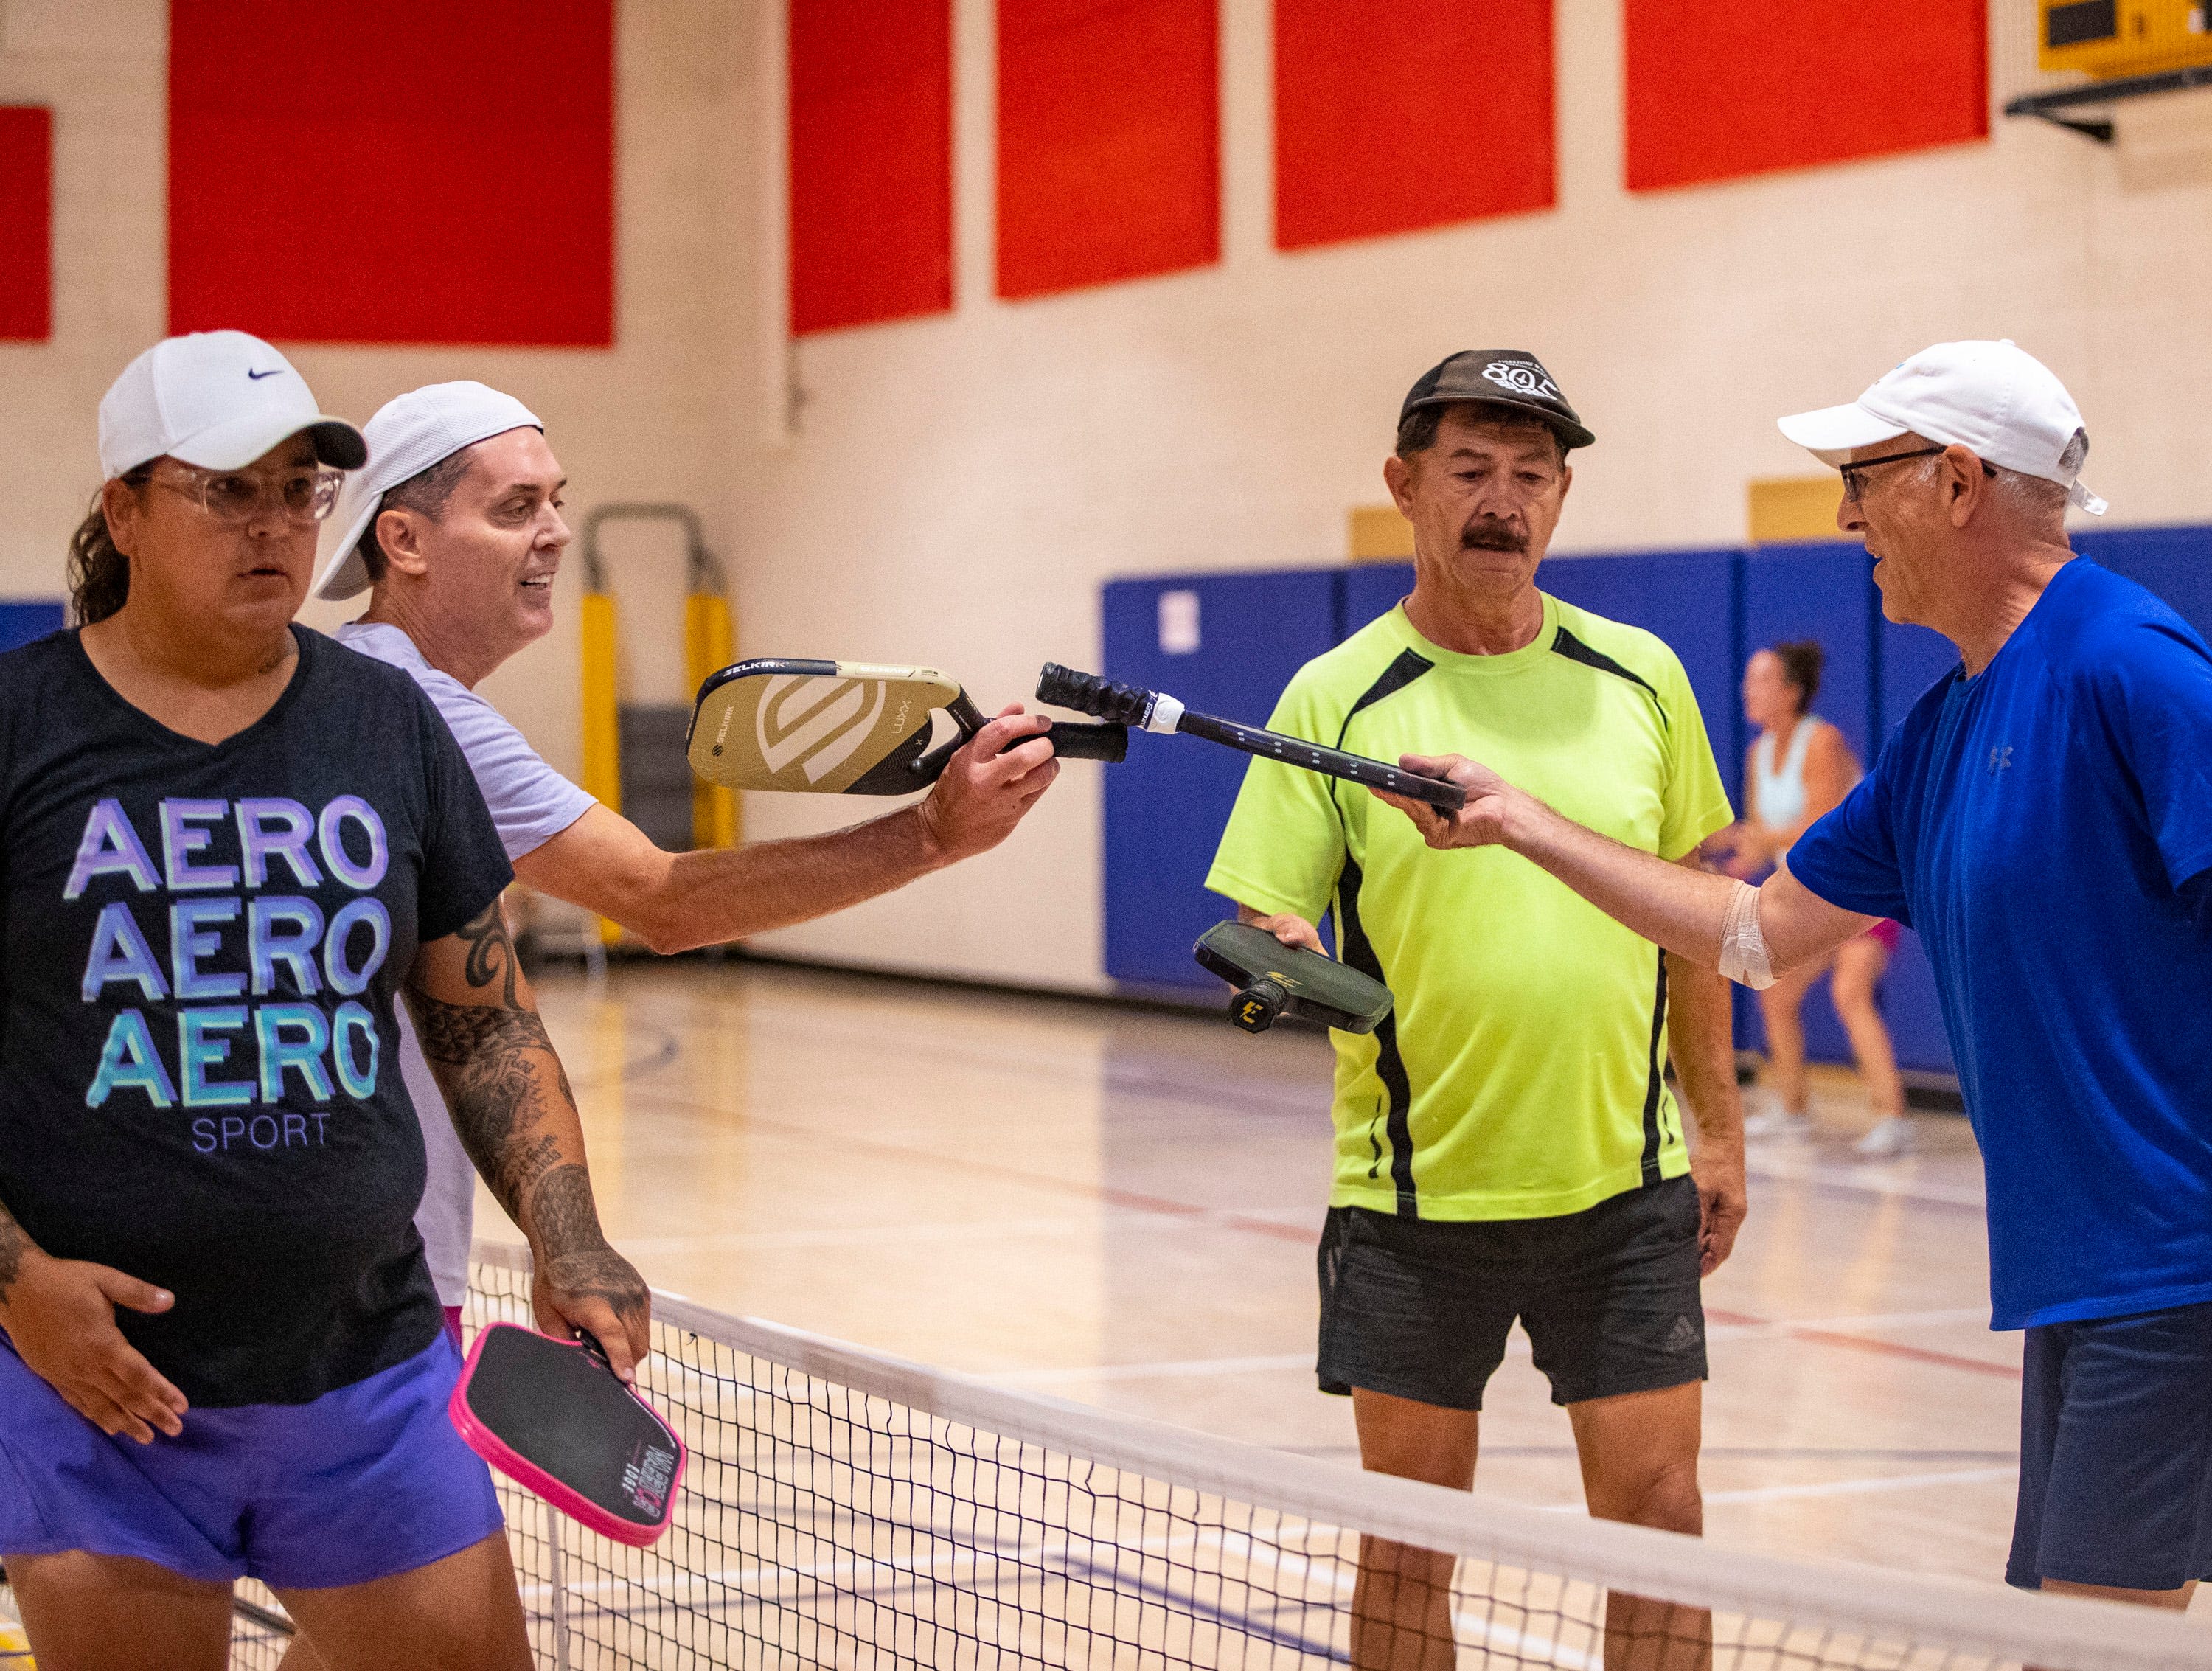 Pickleball: After you drill, put the new skill to the test in a game